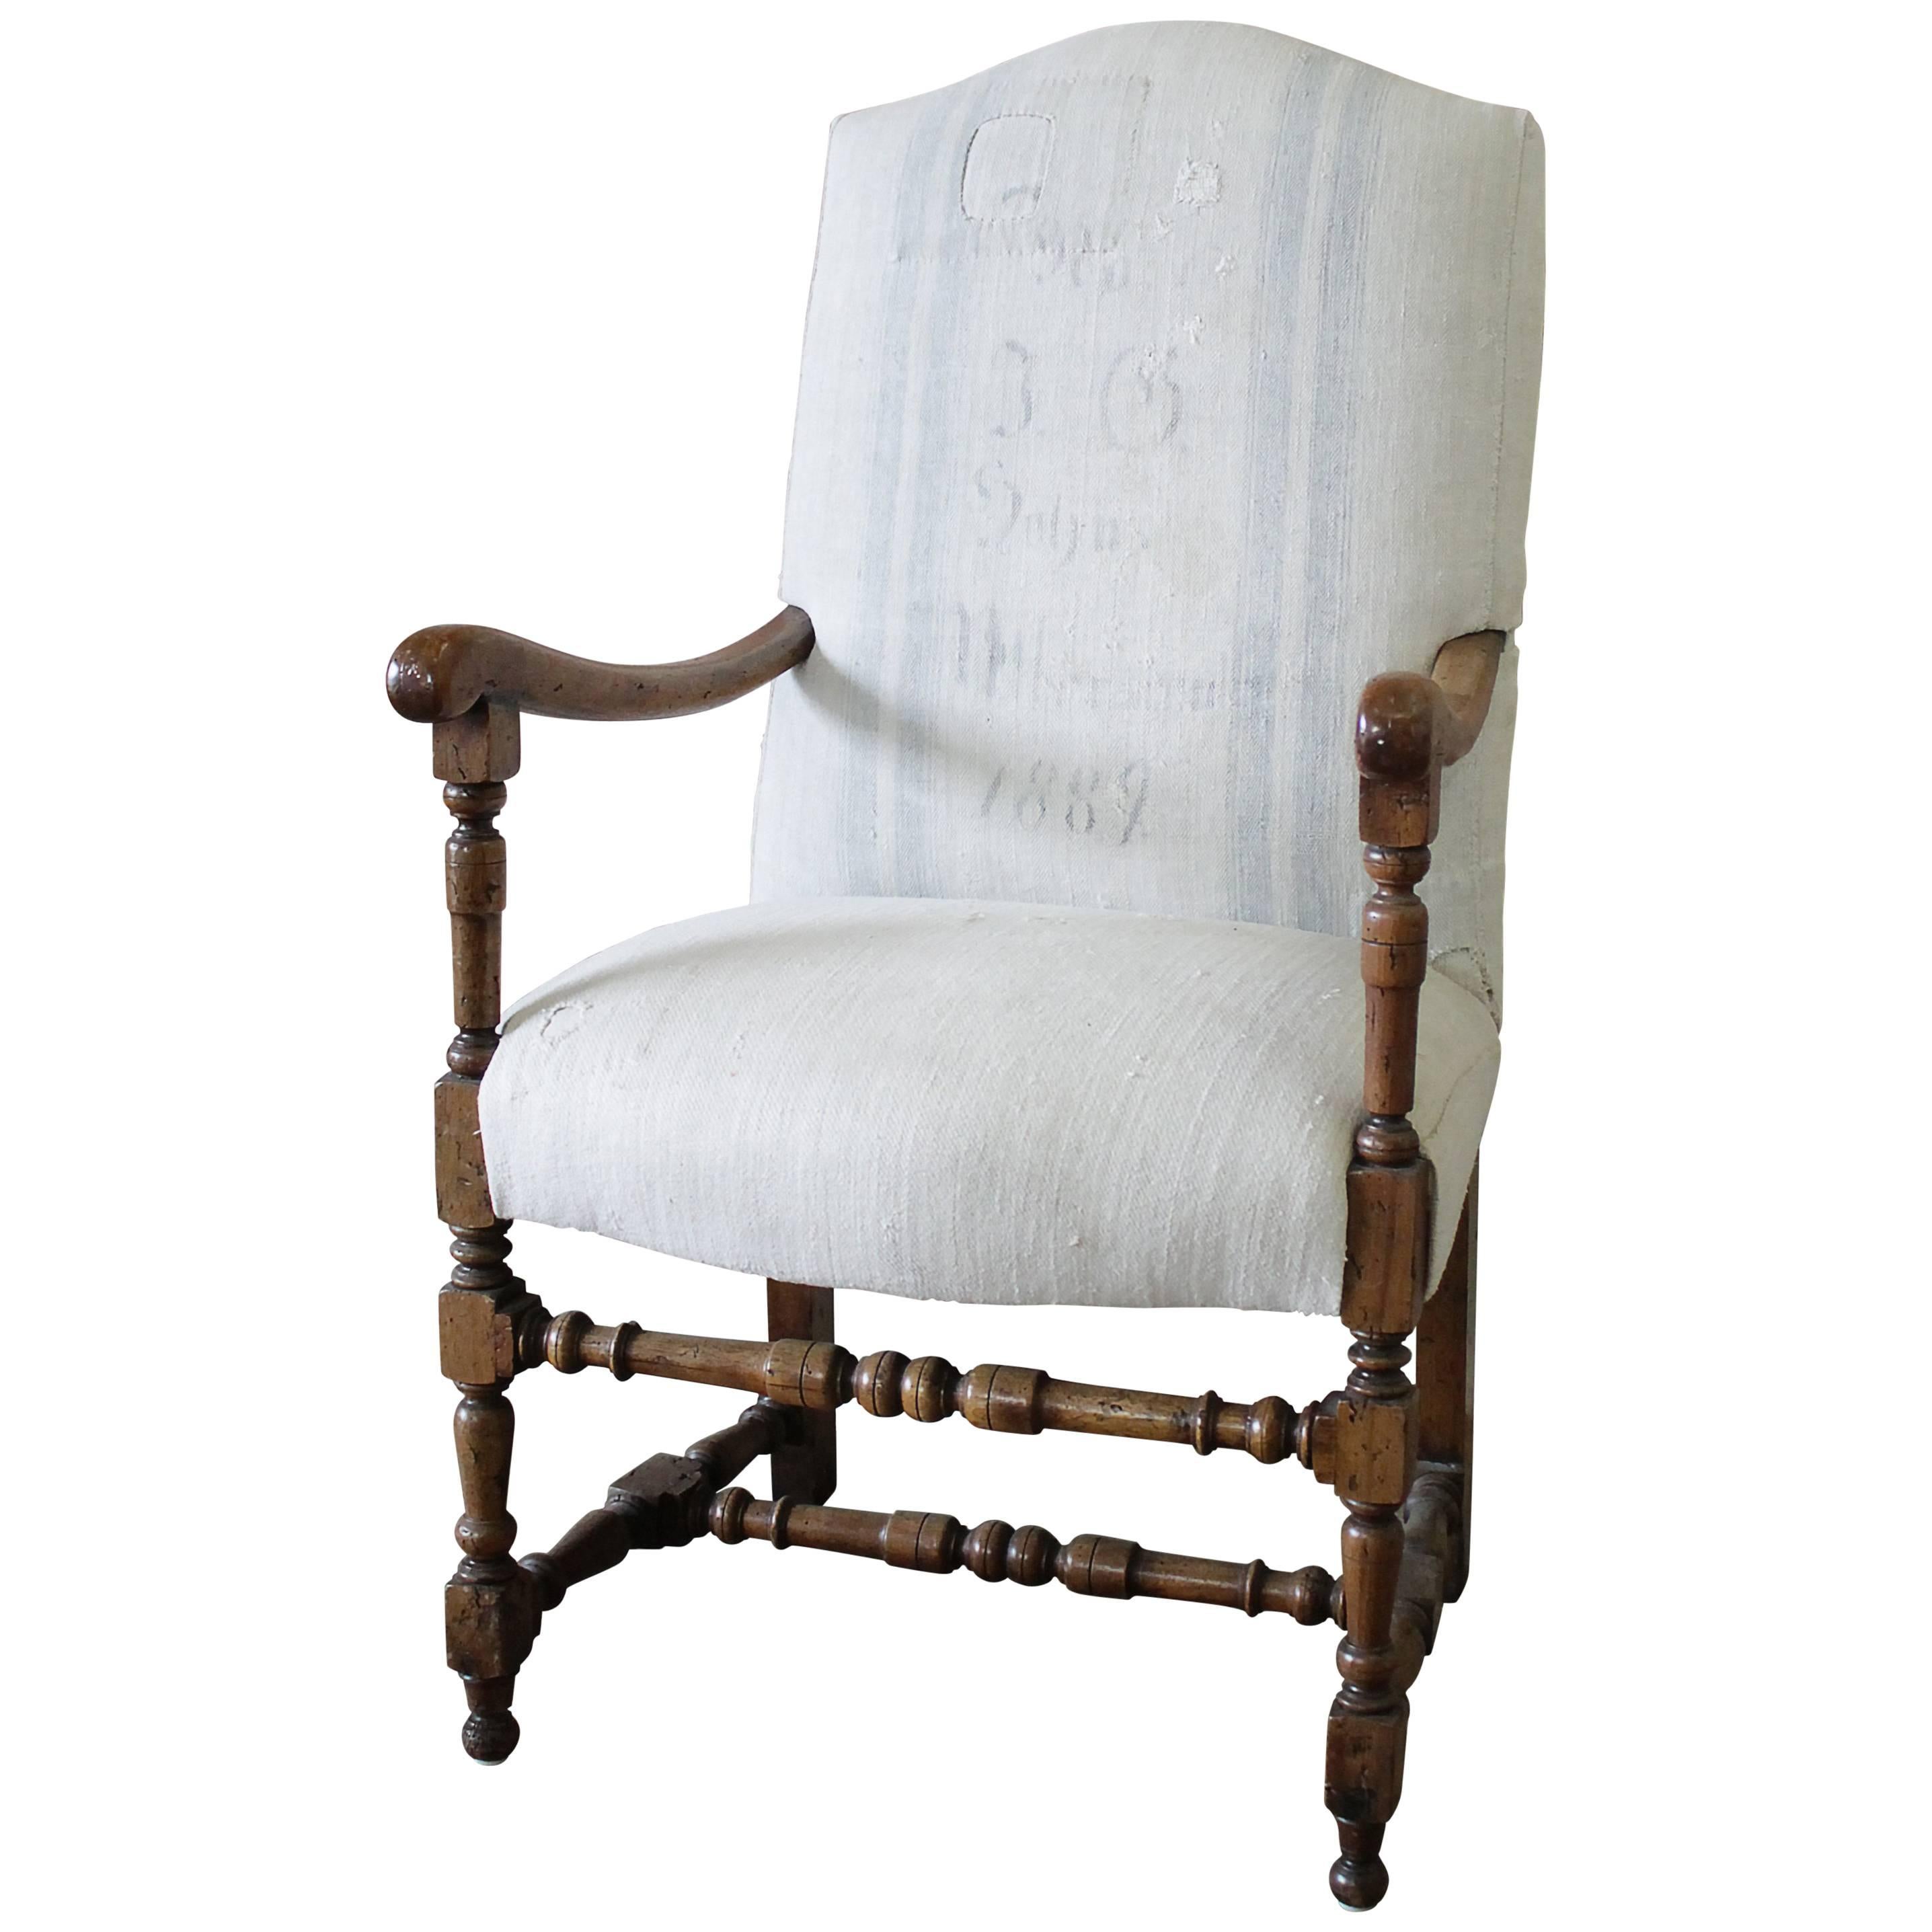 Antique Accent Chair Upholstered in Antique Swedish Grainsack